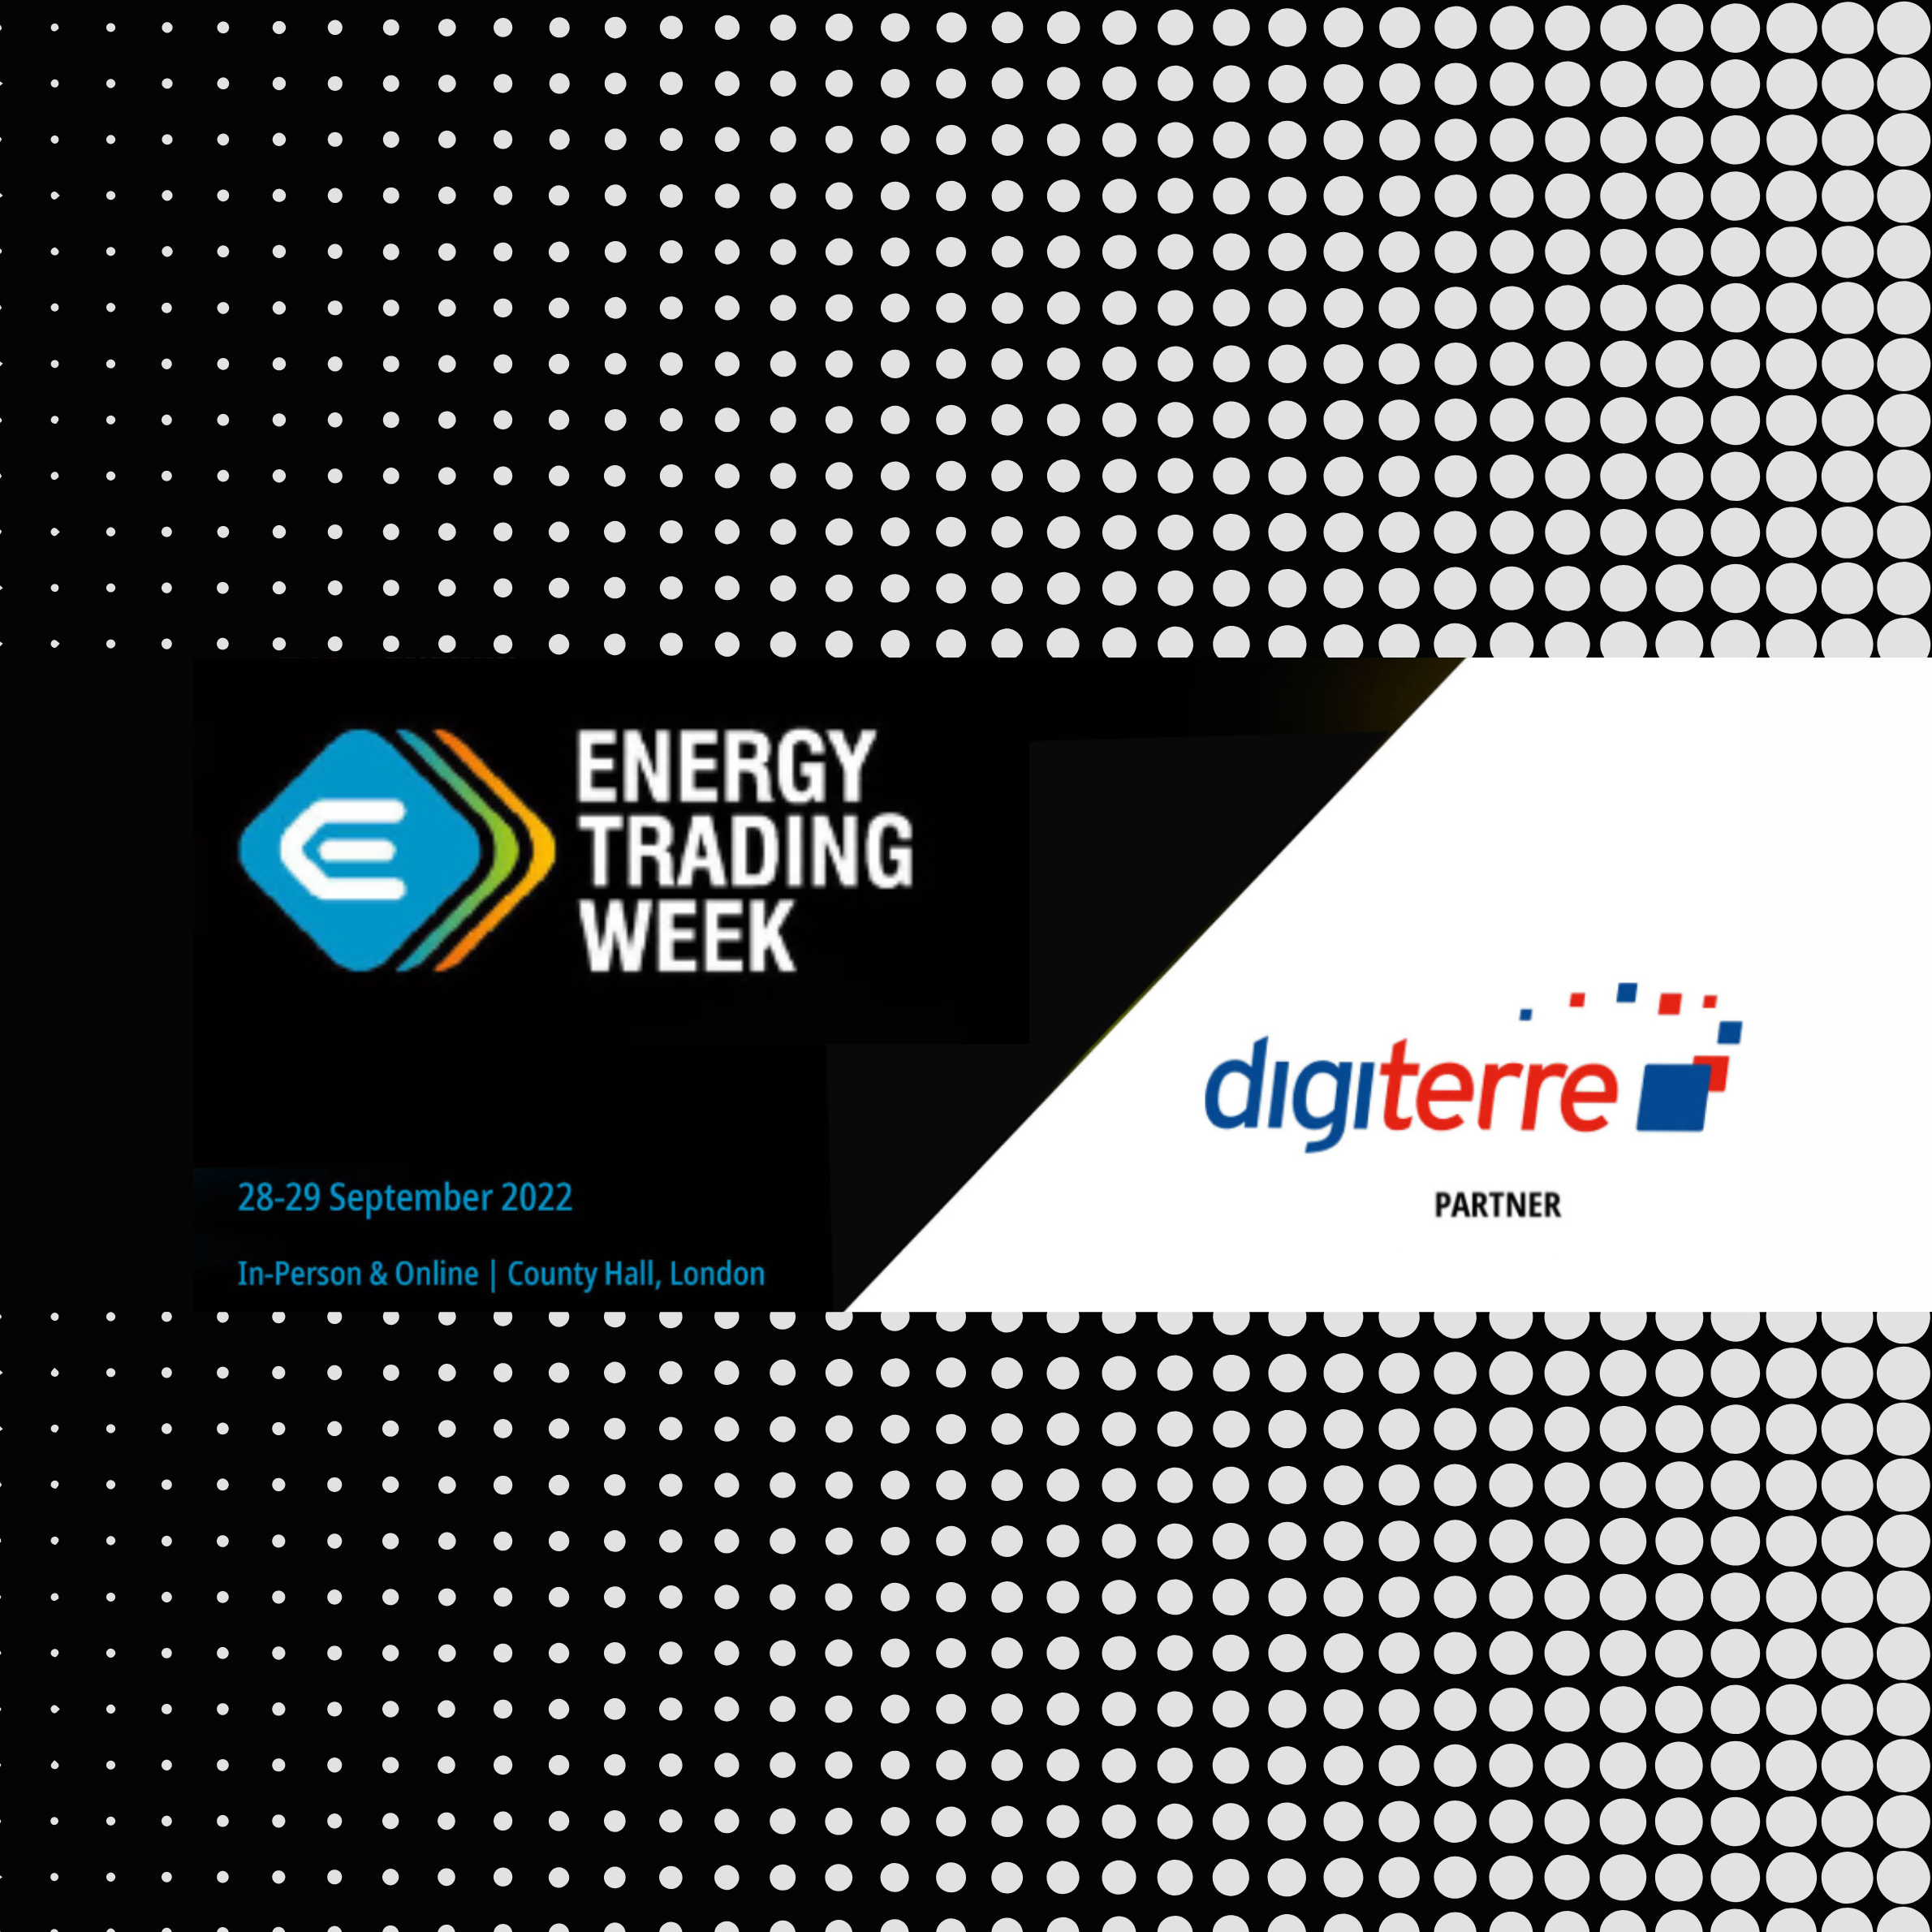 Key themes from Energy Trading Week 2022